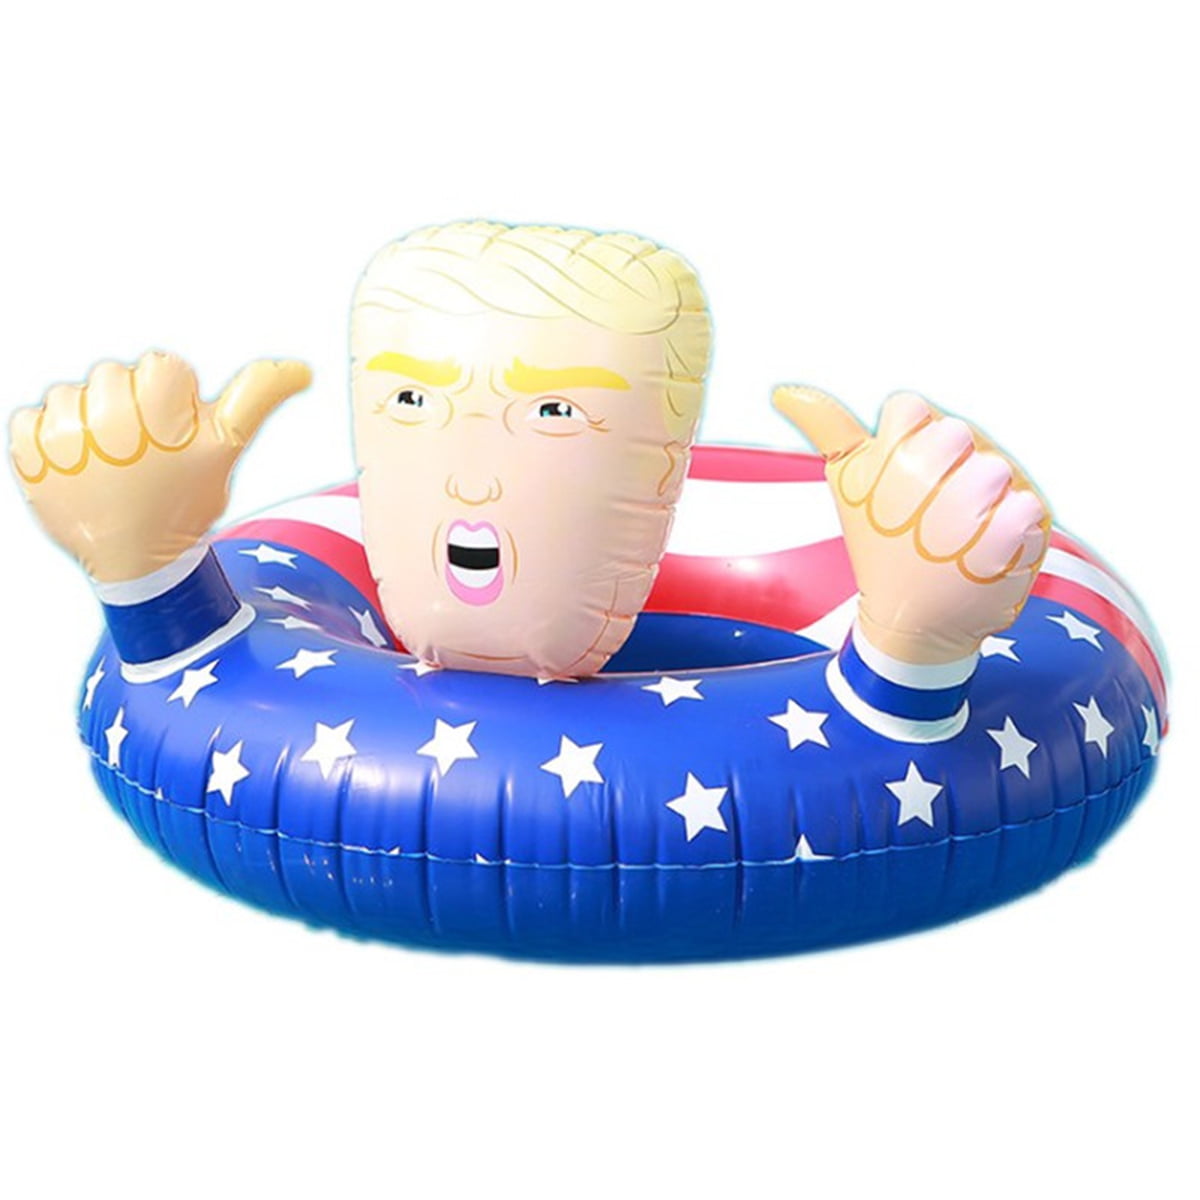 Giant 4-ft Donald Trump Pool Float Inflatable Swimming Ring for Pool Party